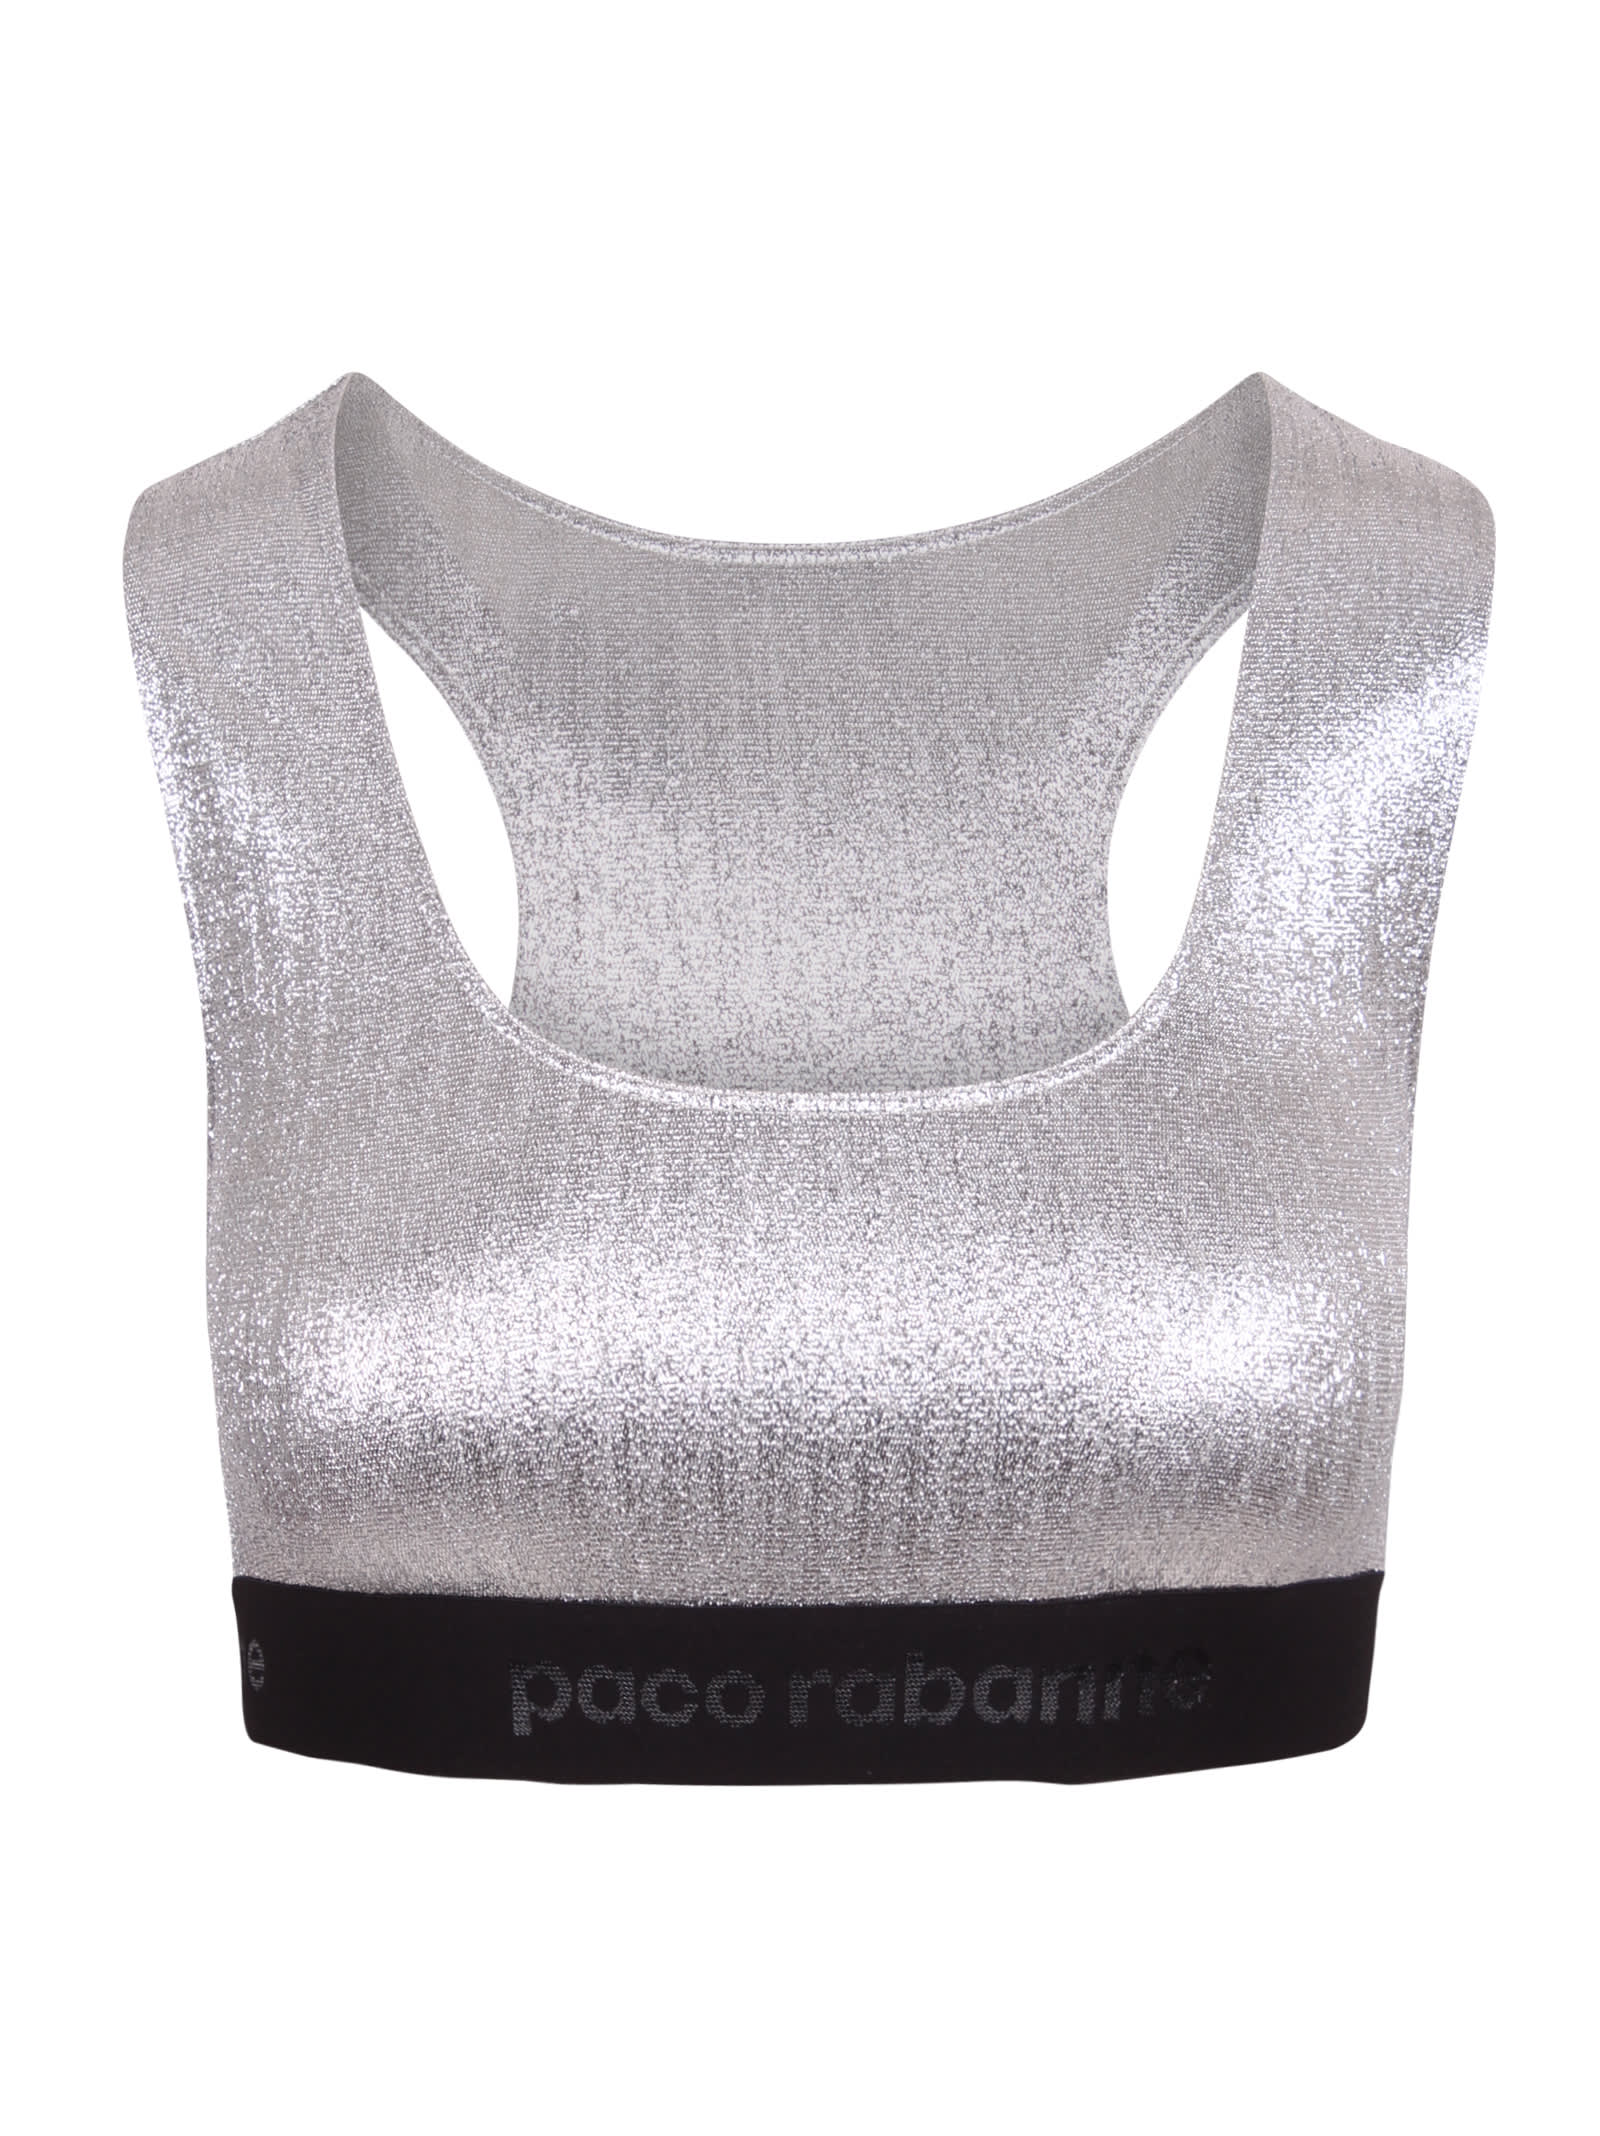 Paco Rabanne Olympic Top